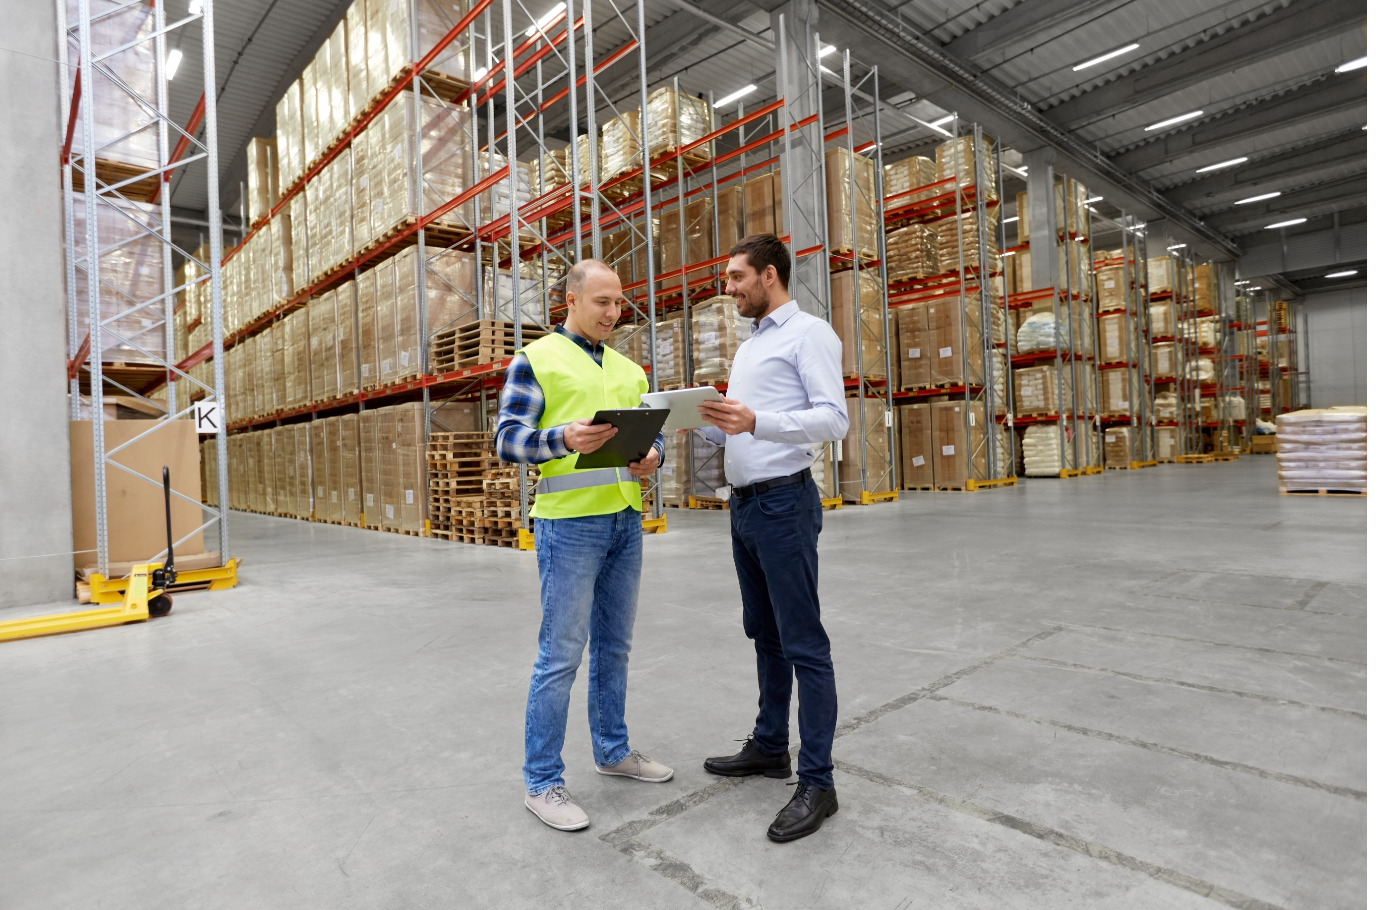 Inventory Audit Testing in Covid Times